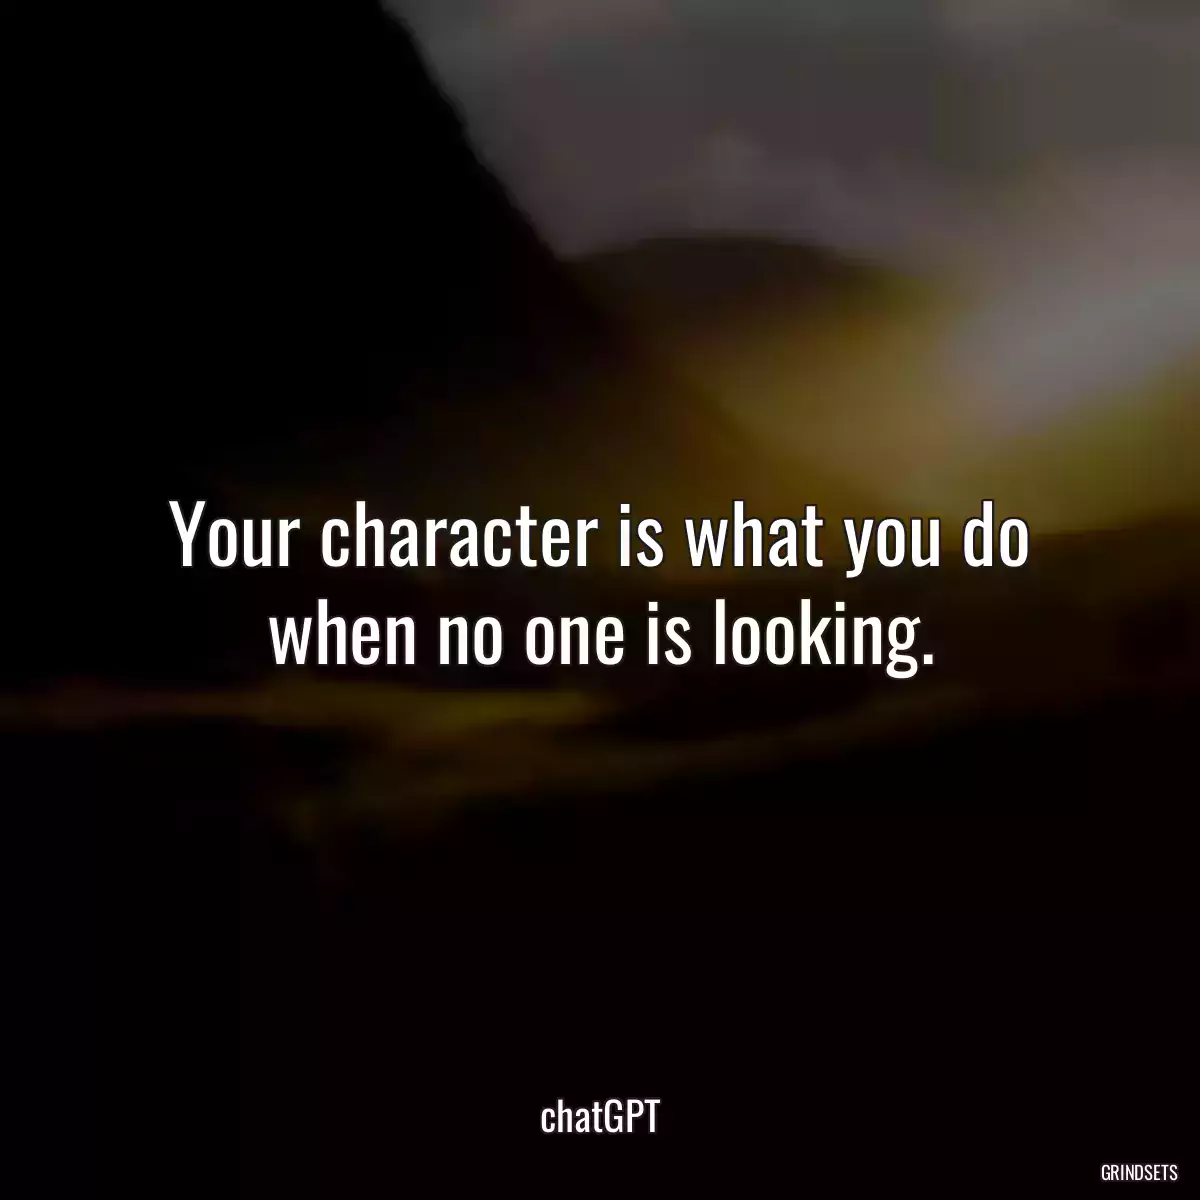 Your character is what you do when no one is looking.